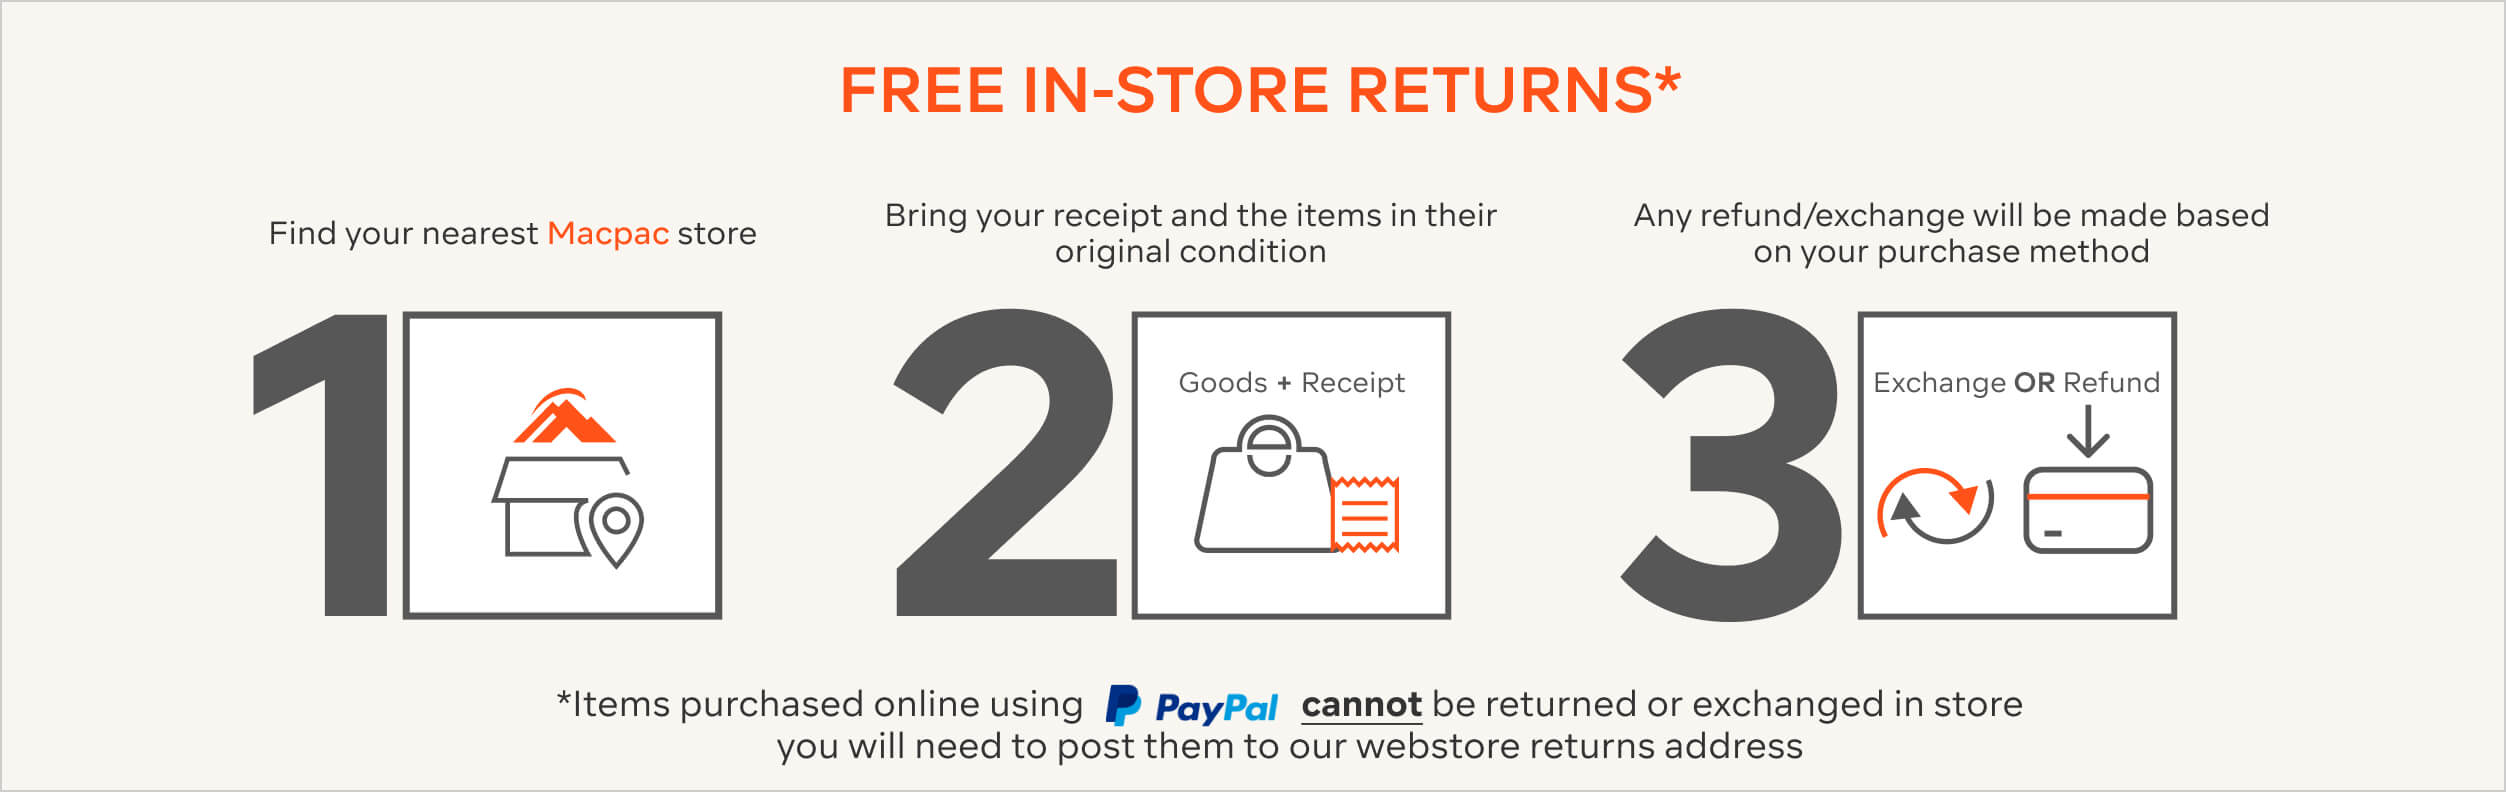 Free In-store Returns